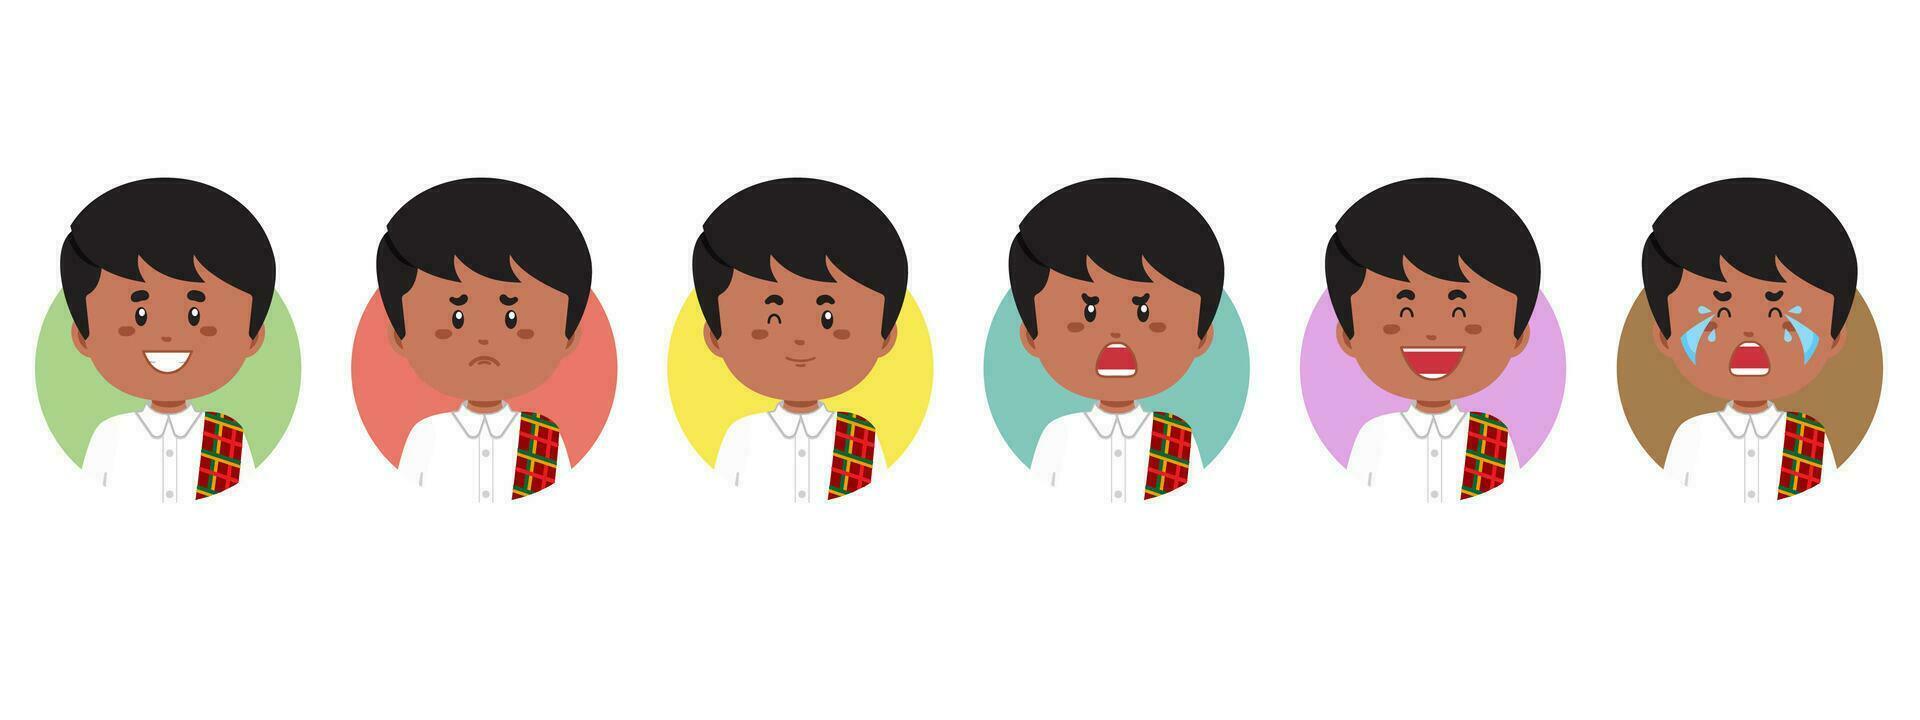 Dominica Avatar with Various Expression vector